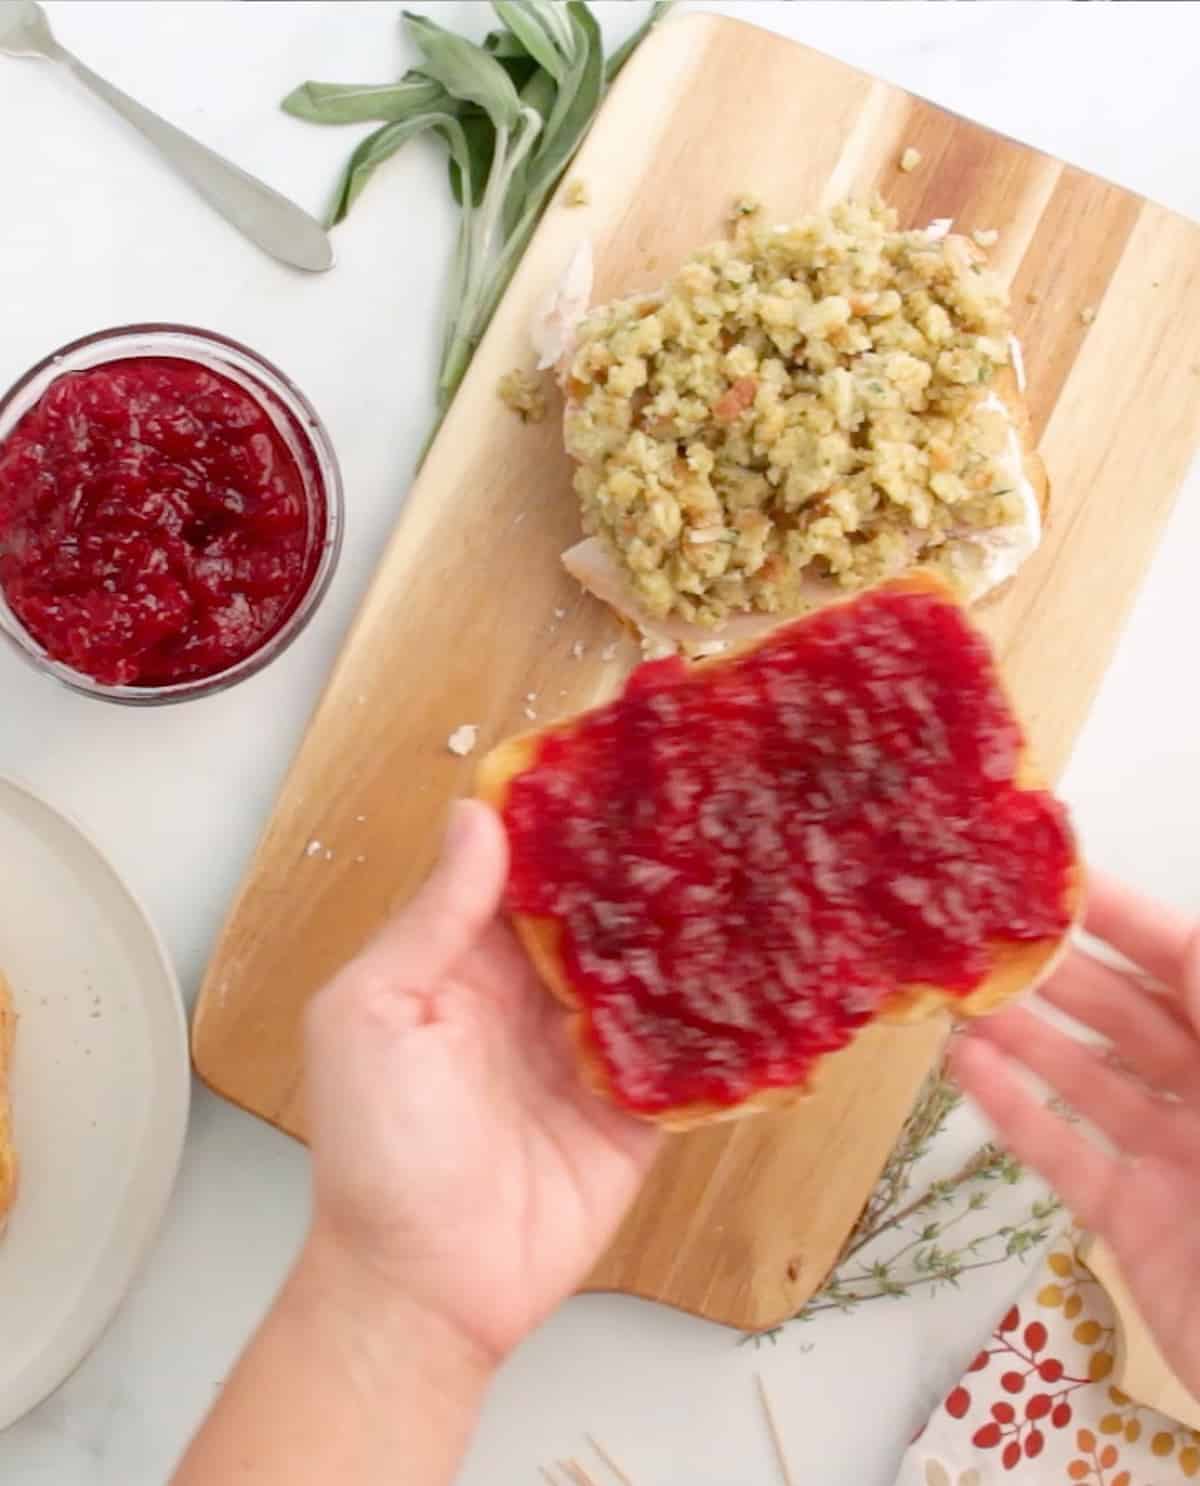 A person is putting cranberry sauce on a slice of bread.